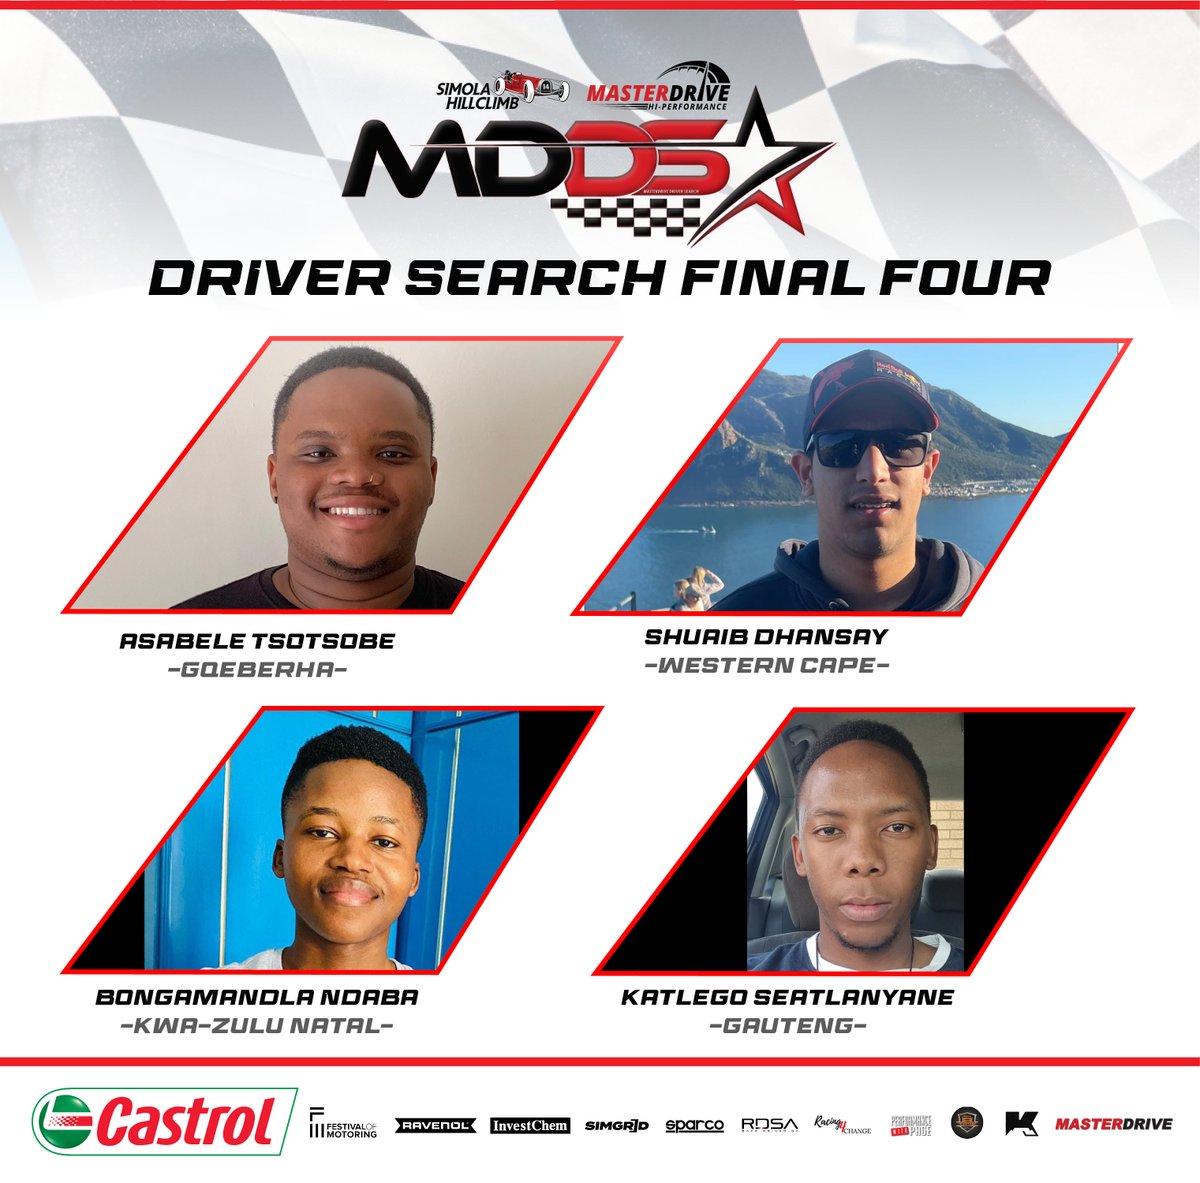 Congratulations to the final four of the MasterDrive Simola Hillclimb Driver Search Competition!